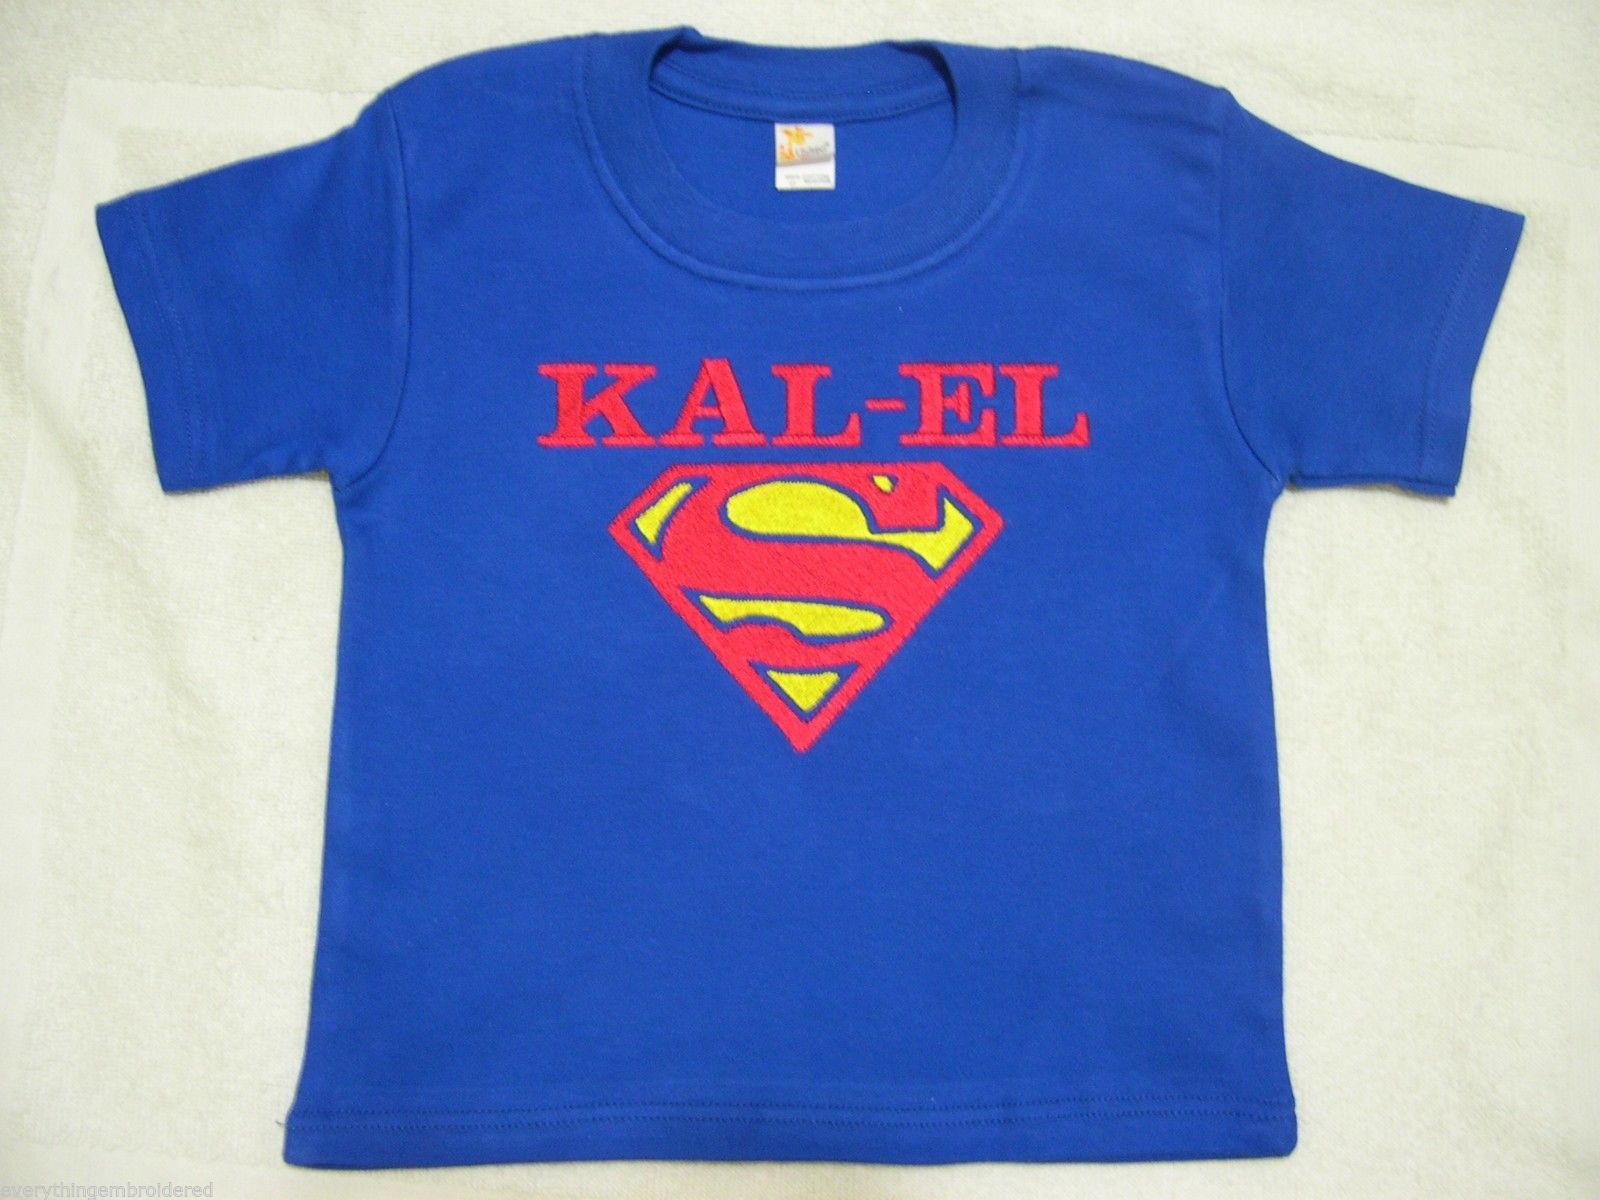 BOY'S ROYAL BLUE SUPERMAN TEE T-SHIRT PERSONALIZED with Child's Name SZ 2T or 3T - $19.99